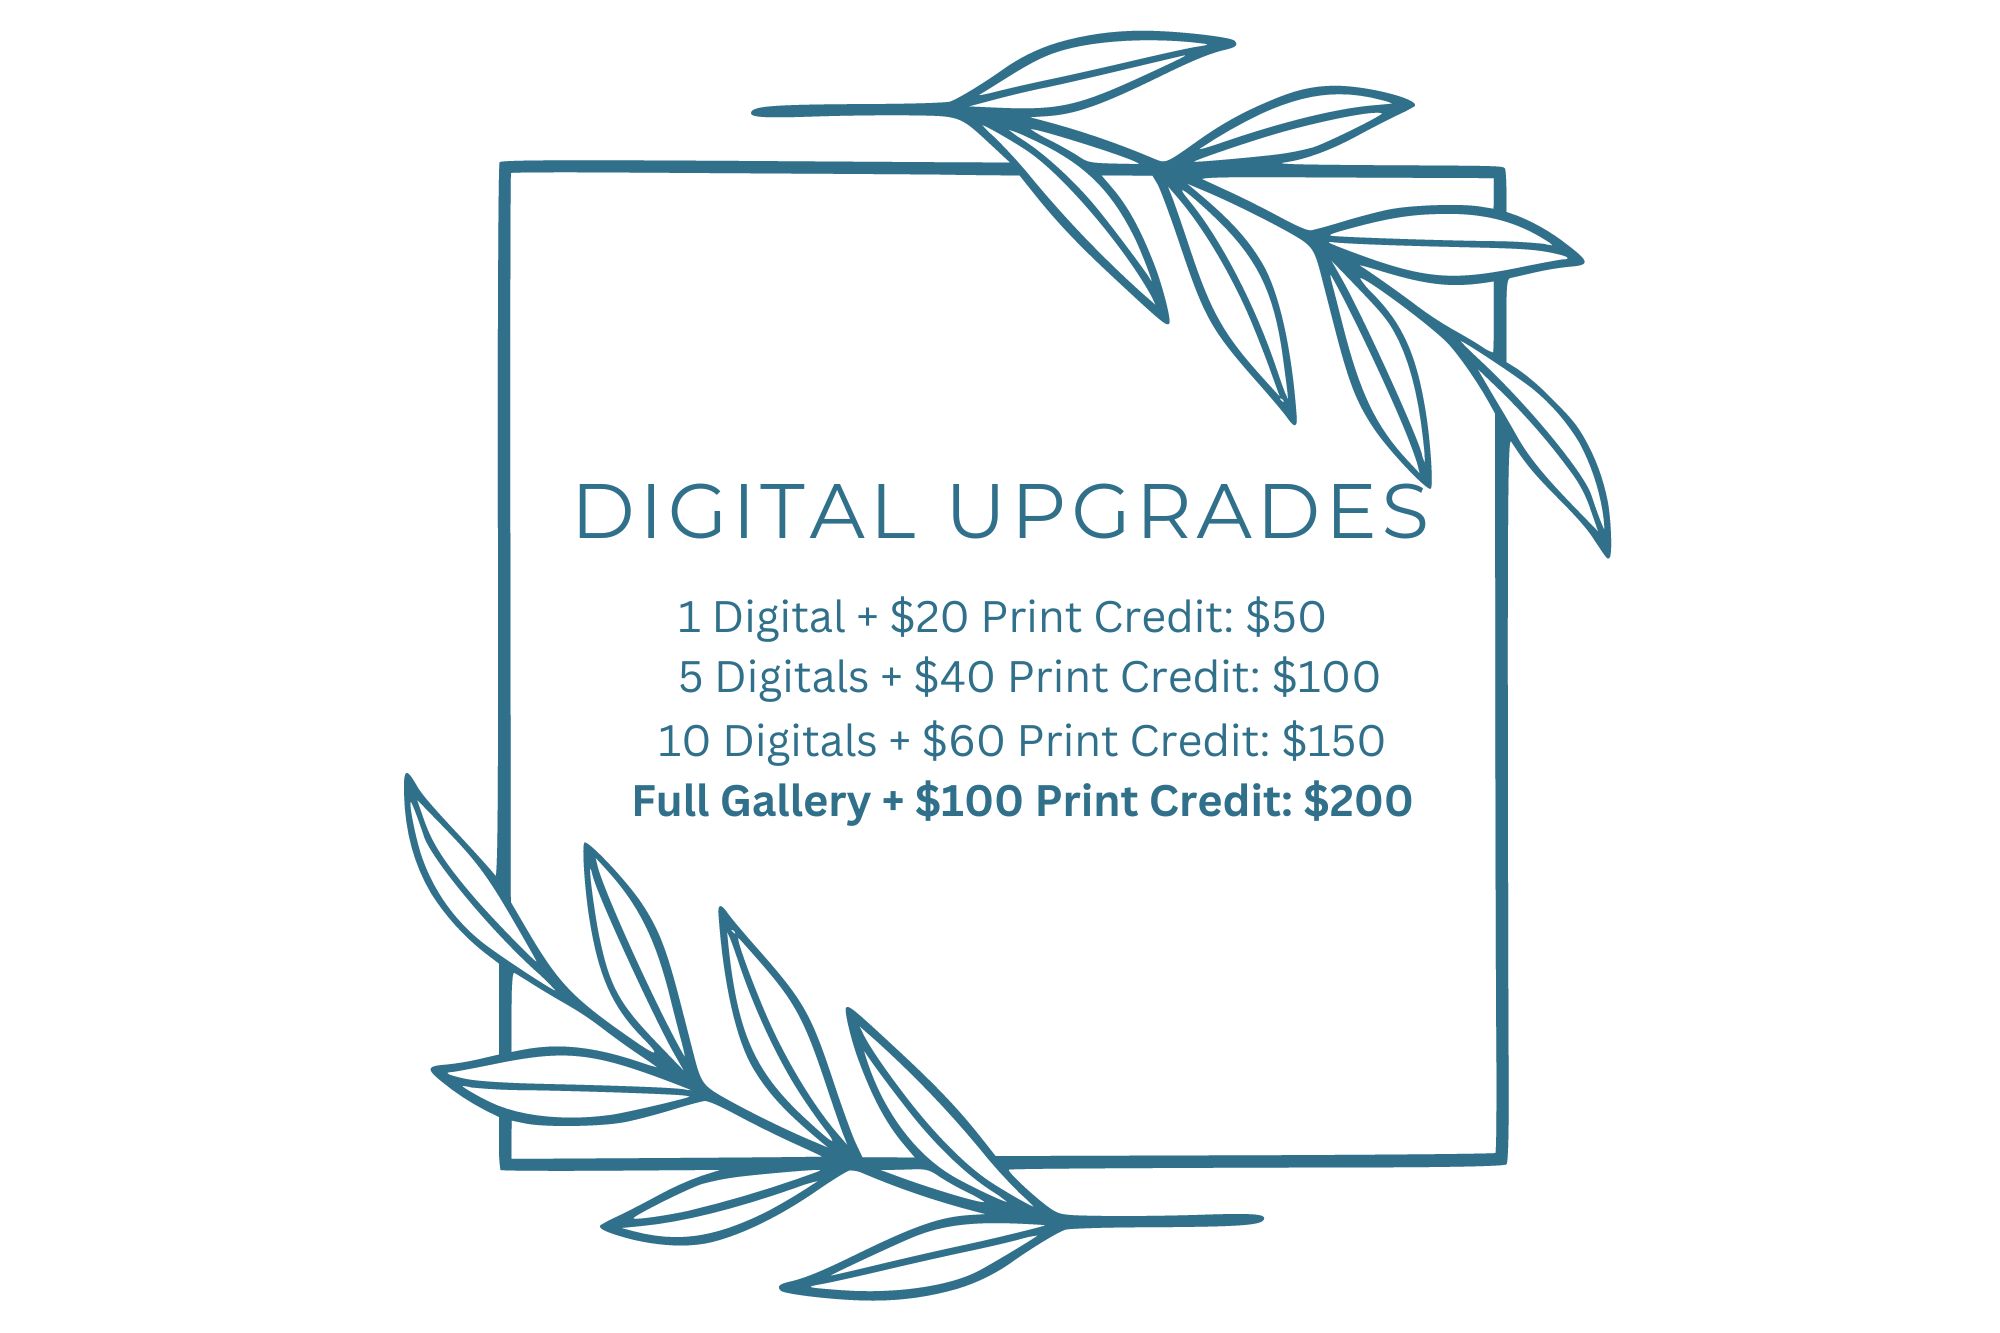 digital upgrade packages including print credits